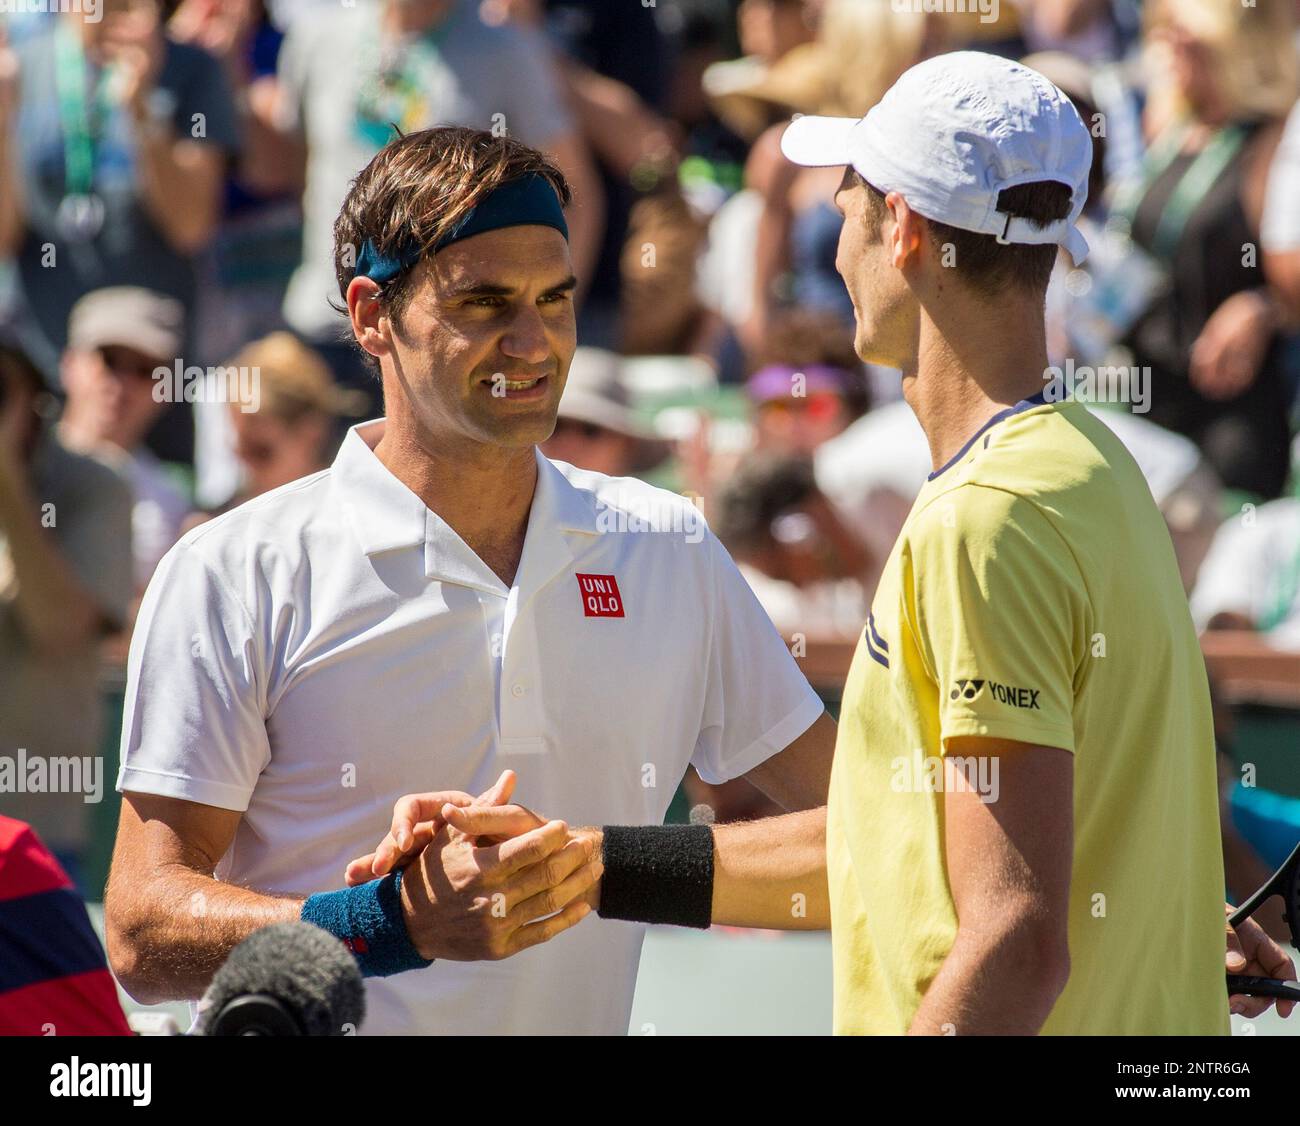 March 15, 2019: Roger Federer (SUI) and Hubert Hurkacz (POL) shake hands  after the match. Federer defeated Hurkacz 6-4, 6-4 at the BNP Paribas Open  at the Indian Wells Tennis Garden in